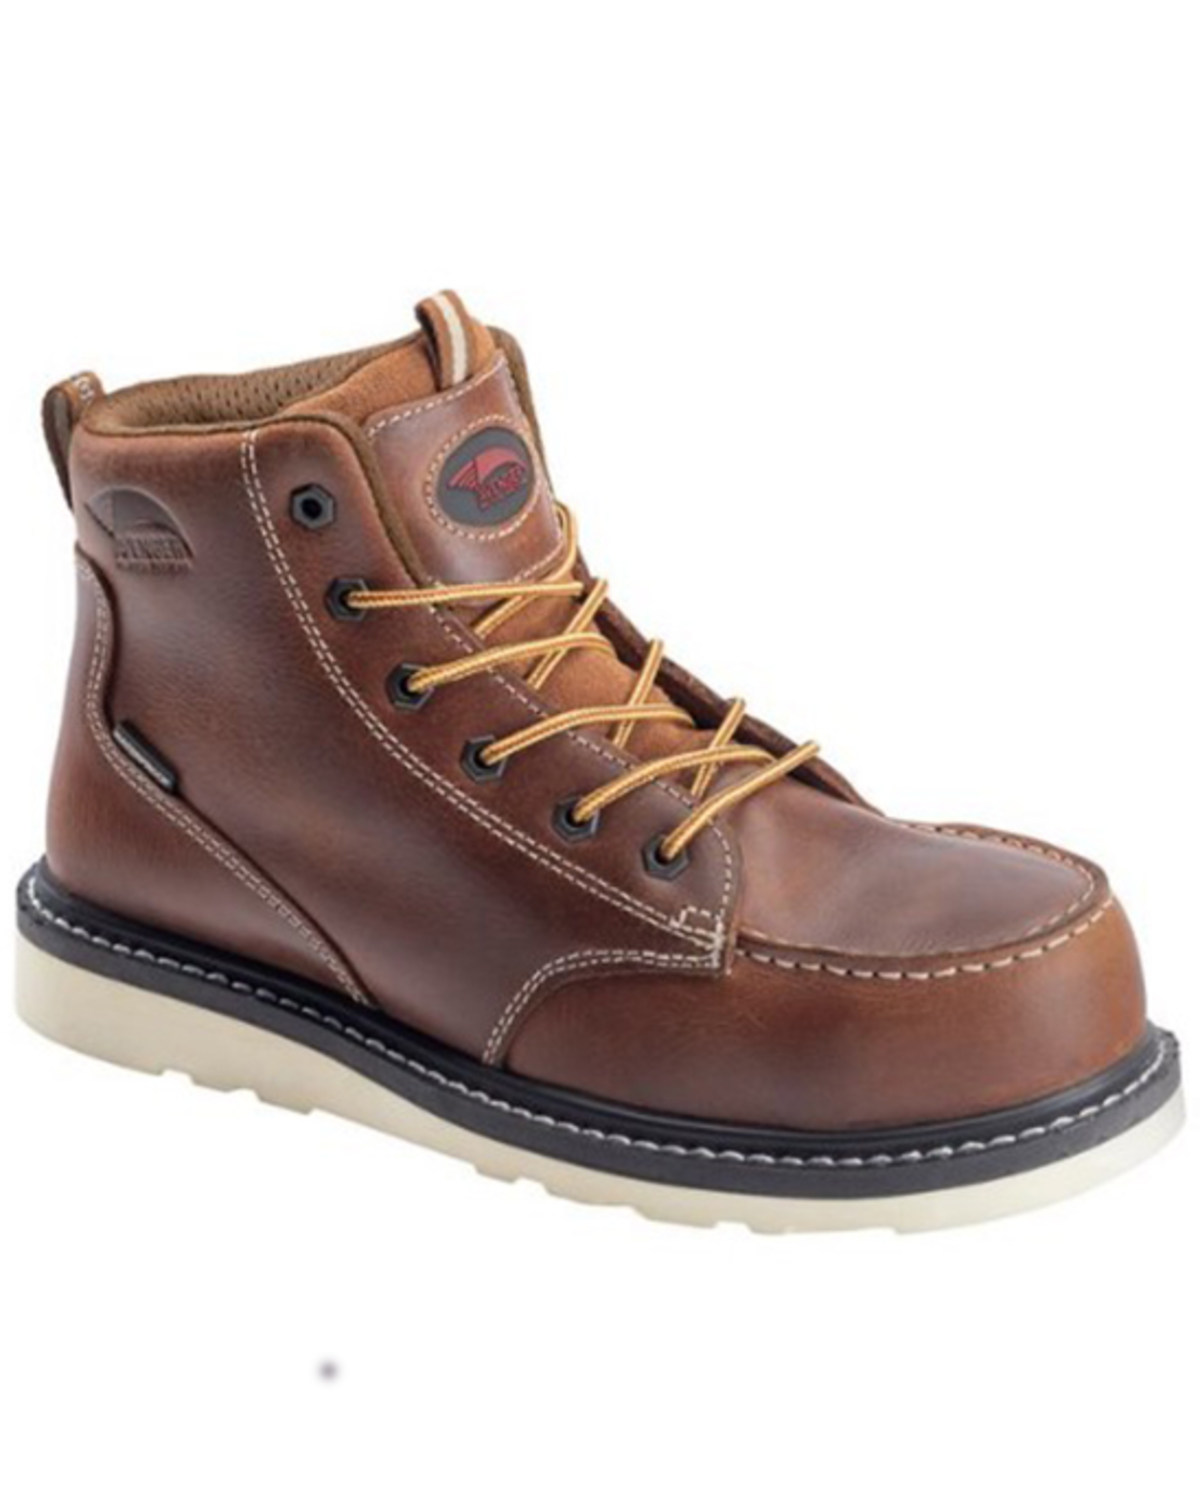 Avenger Men's Wedge Mid 6" Lace-Up Waterproof Work Boots - Carbon Nanofiber Safety Toe